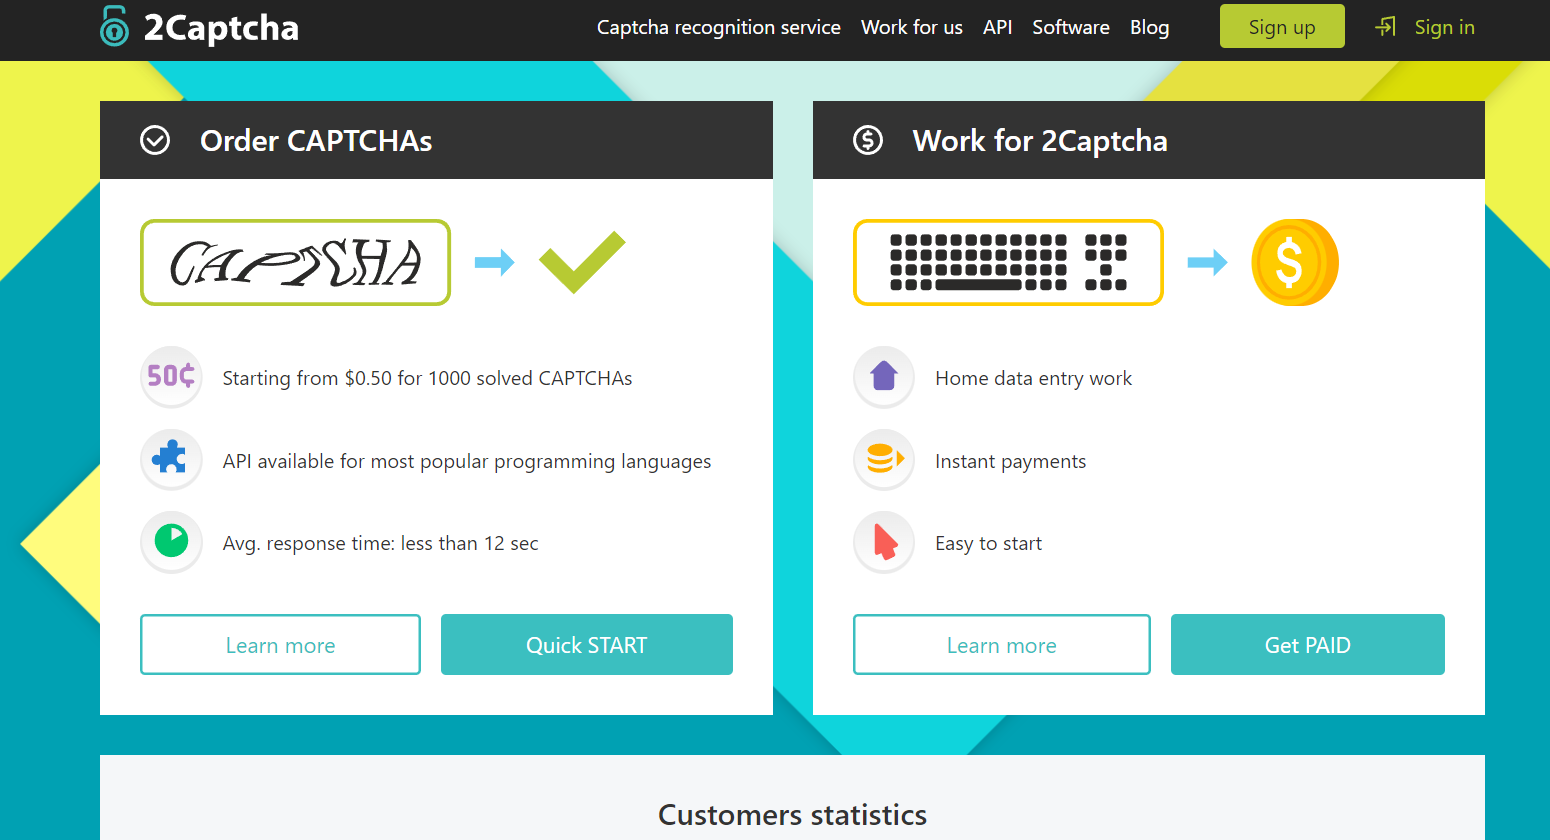 earn money with captcha solving